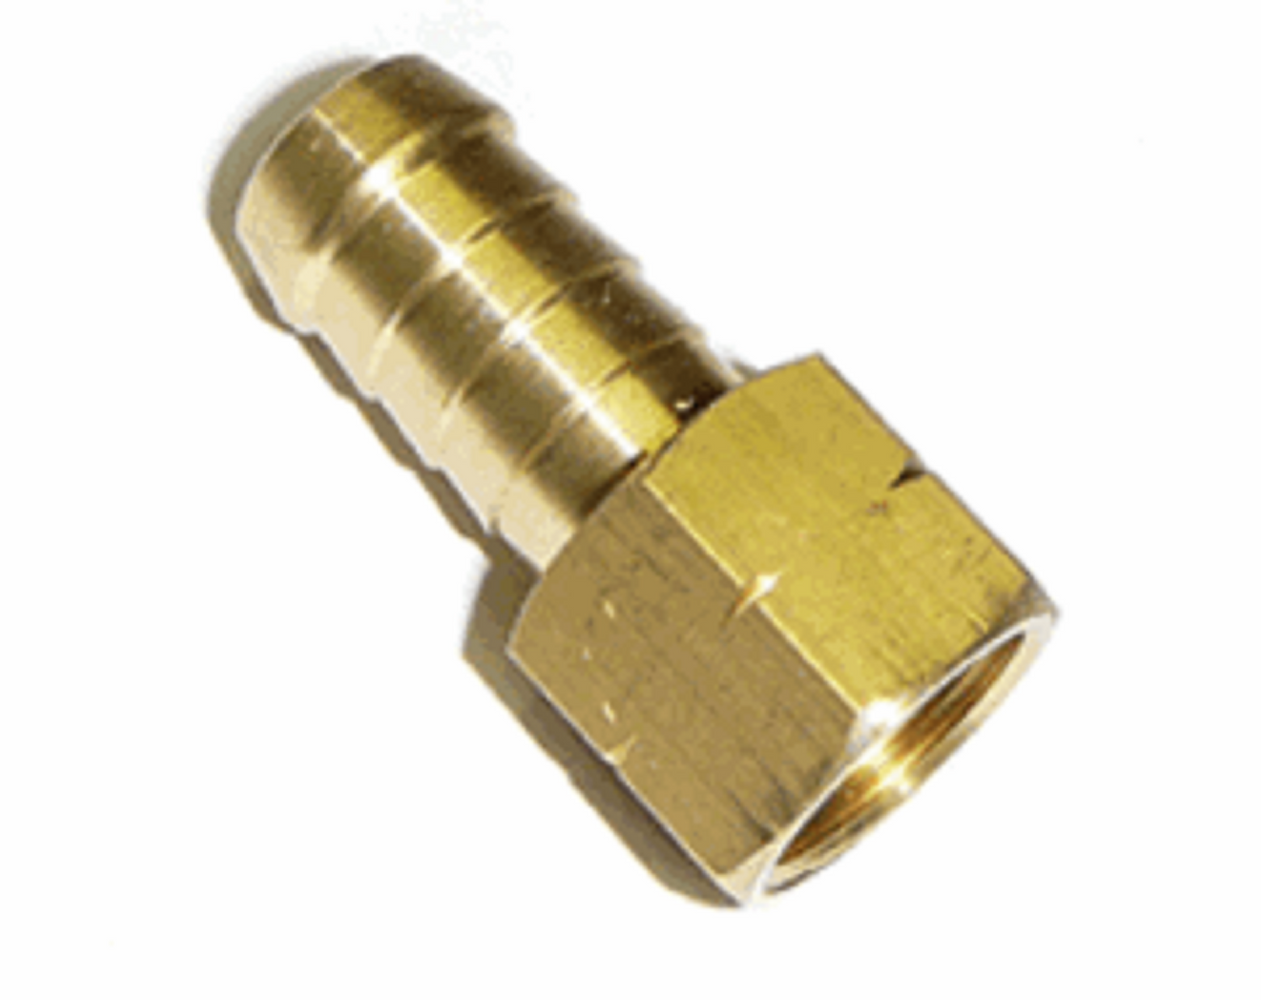 Brass Female Hose Tail - 3/8" Hose x 3/8" NPT - NOTE This is NPT Thread NOT BSP